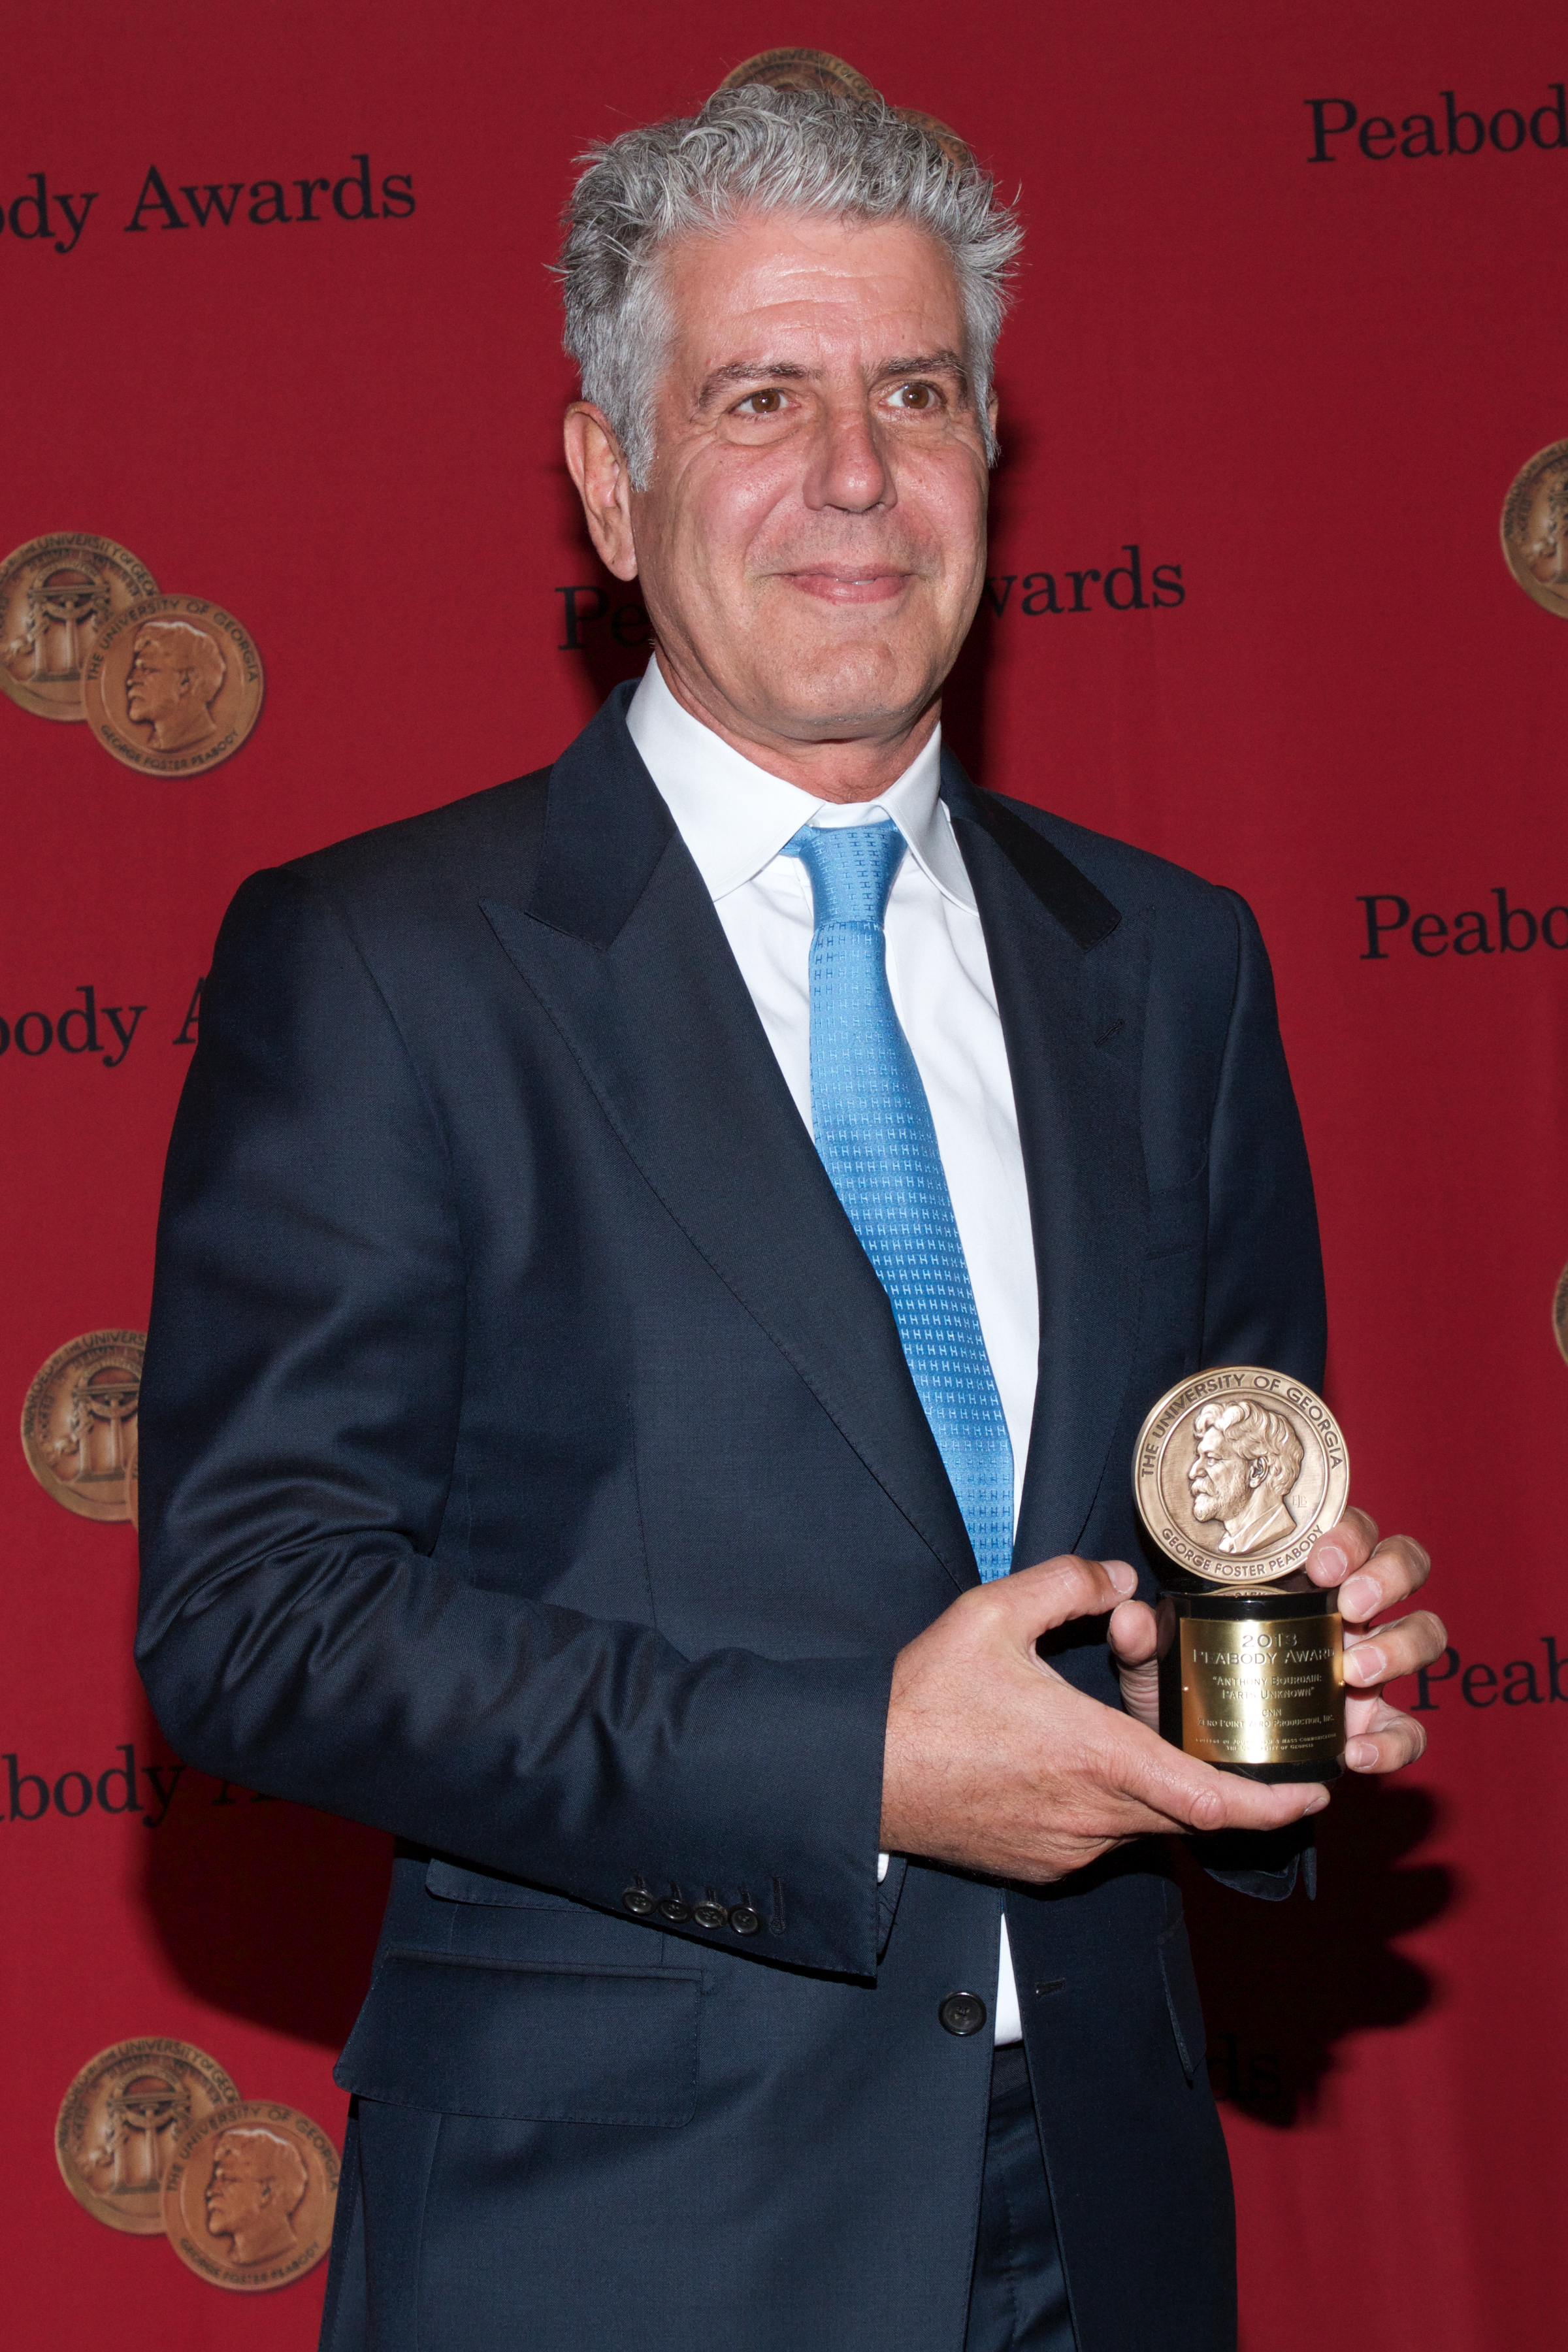 Wikipedia, 2014 Peabody Awards, Anthony Bourdain, Flickr images reviewed by FlickreviewR, Personalit